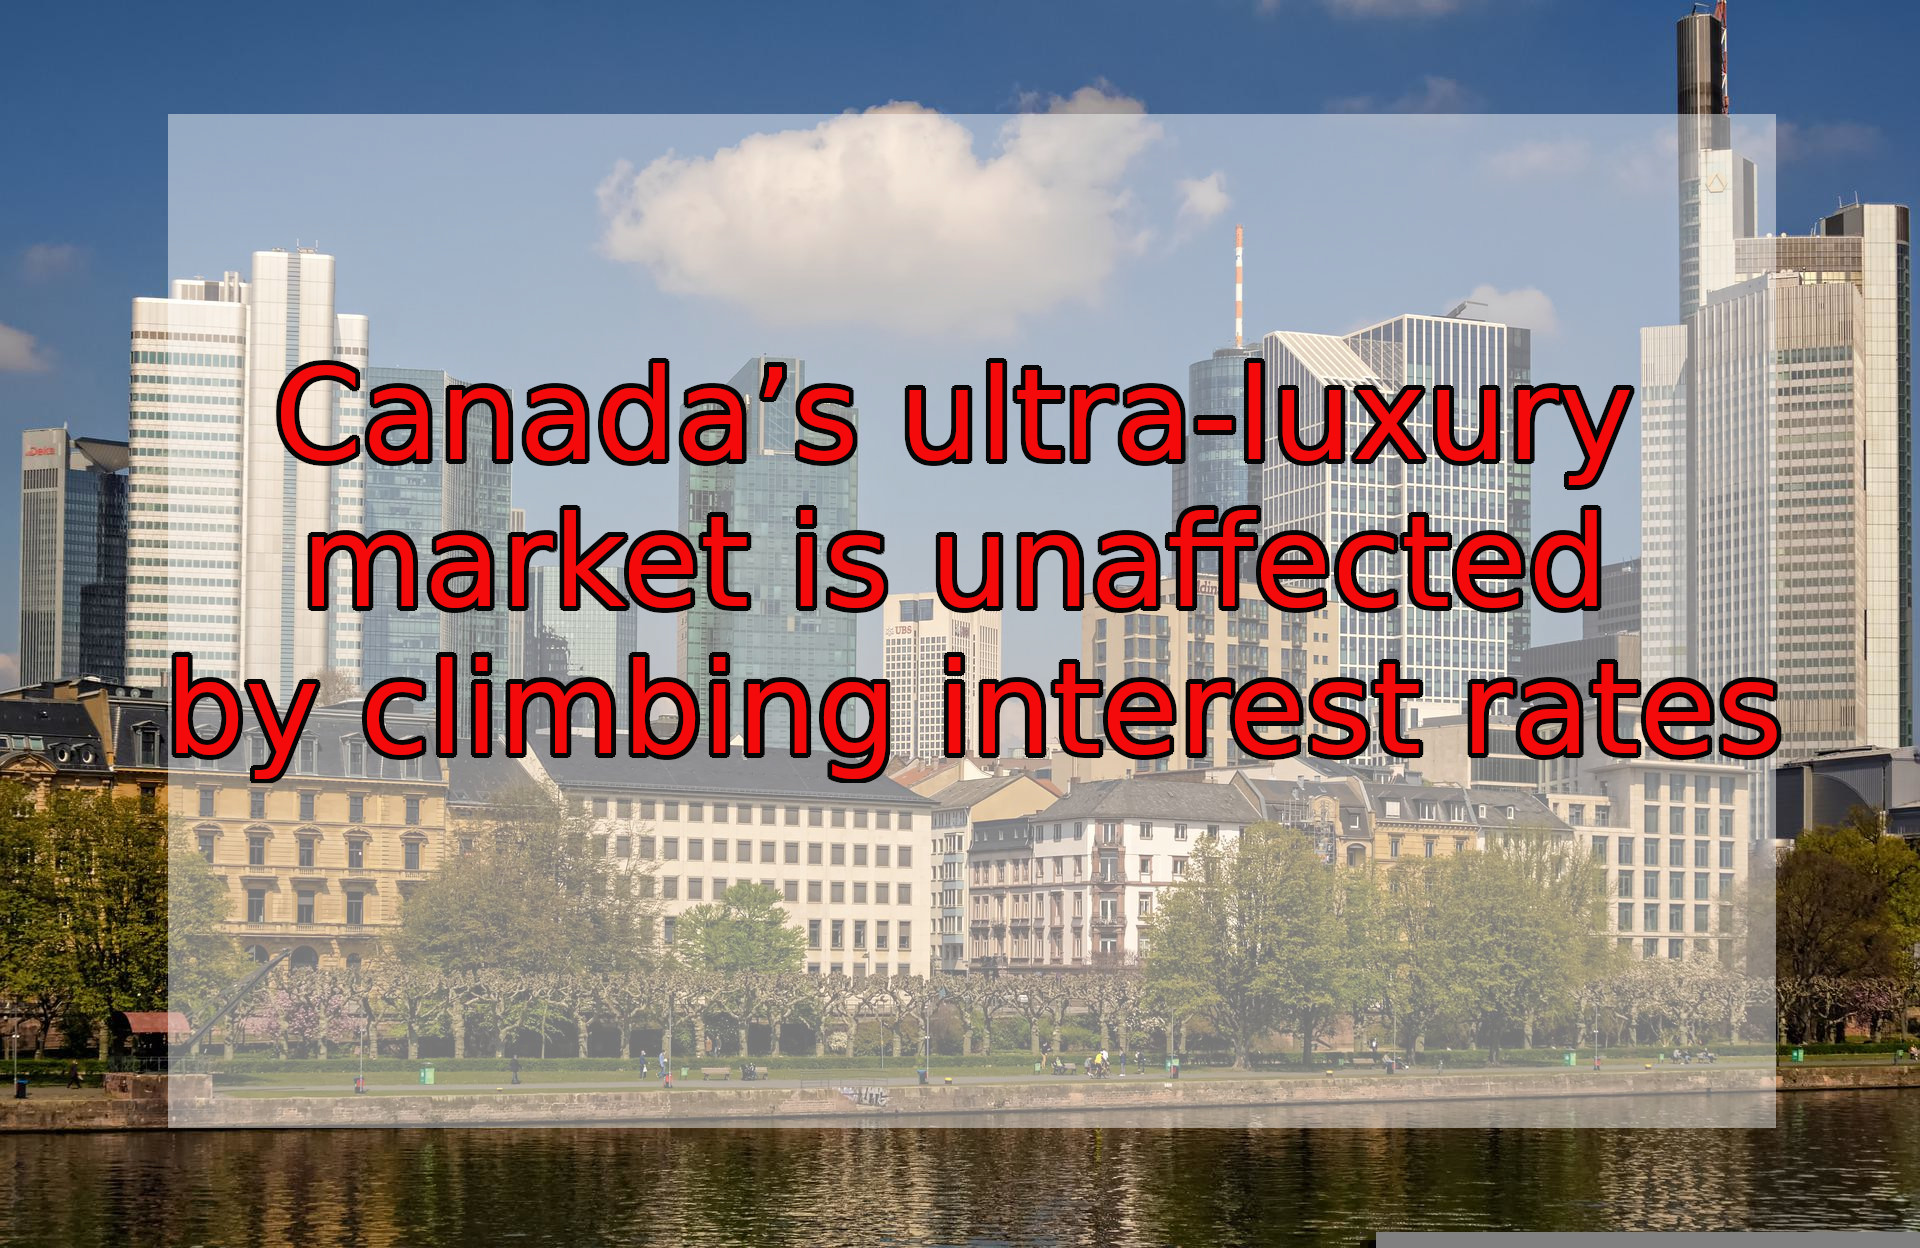 Canada’s ultra-luxury market is unaffected by climbing interest rates